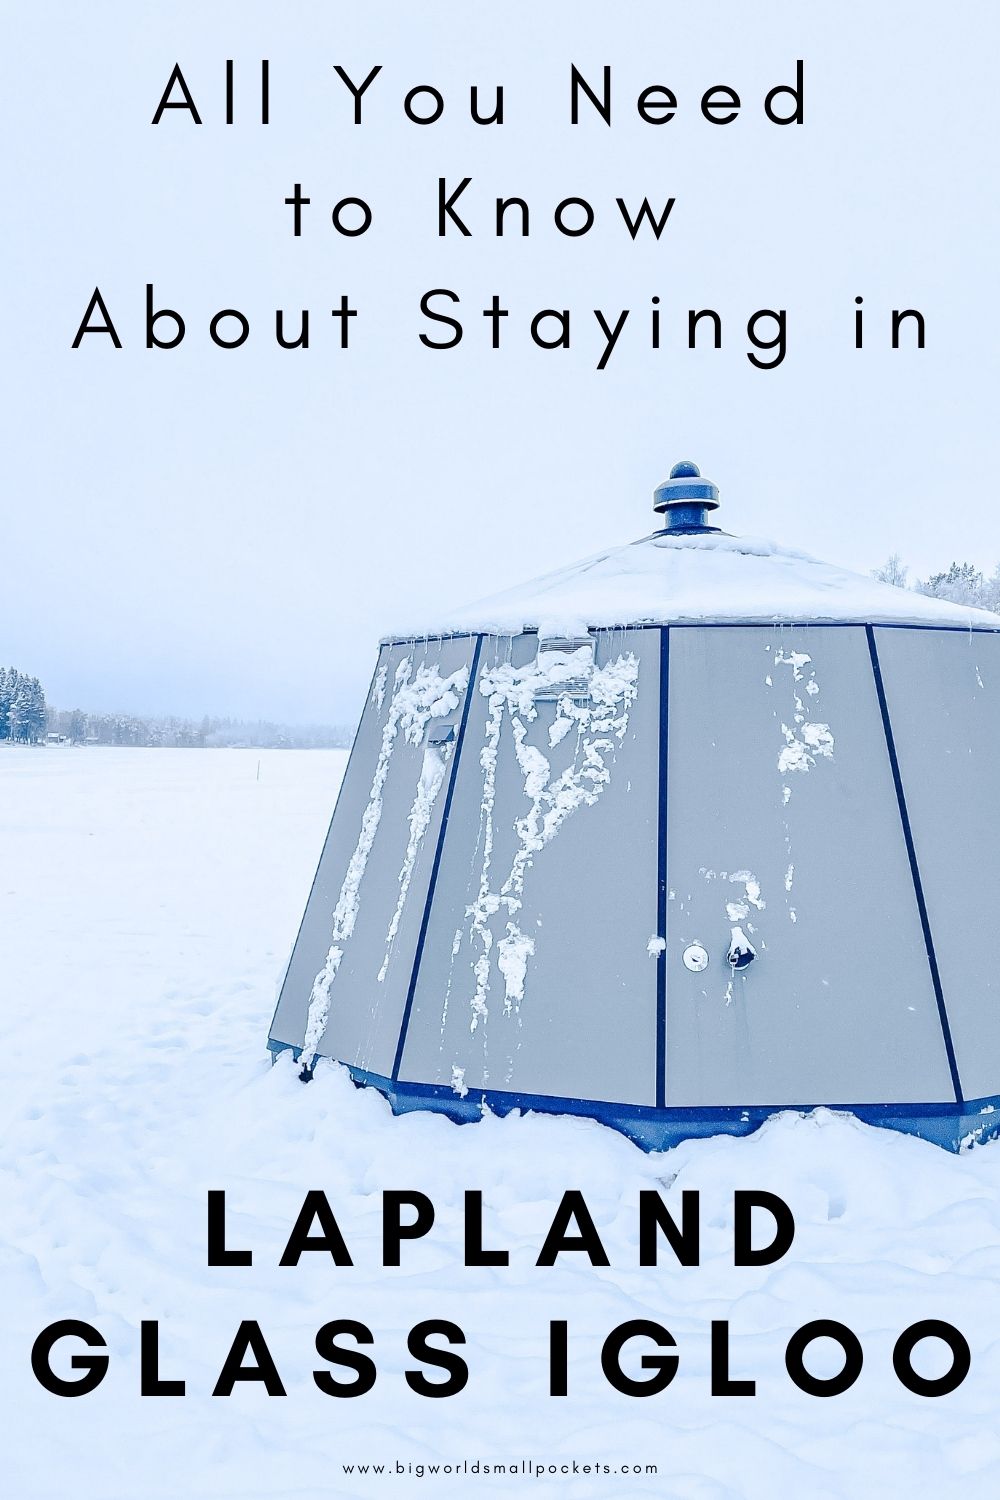 All You Need to Know About Staying in a Glass Igloo in Finnish Lapland